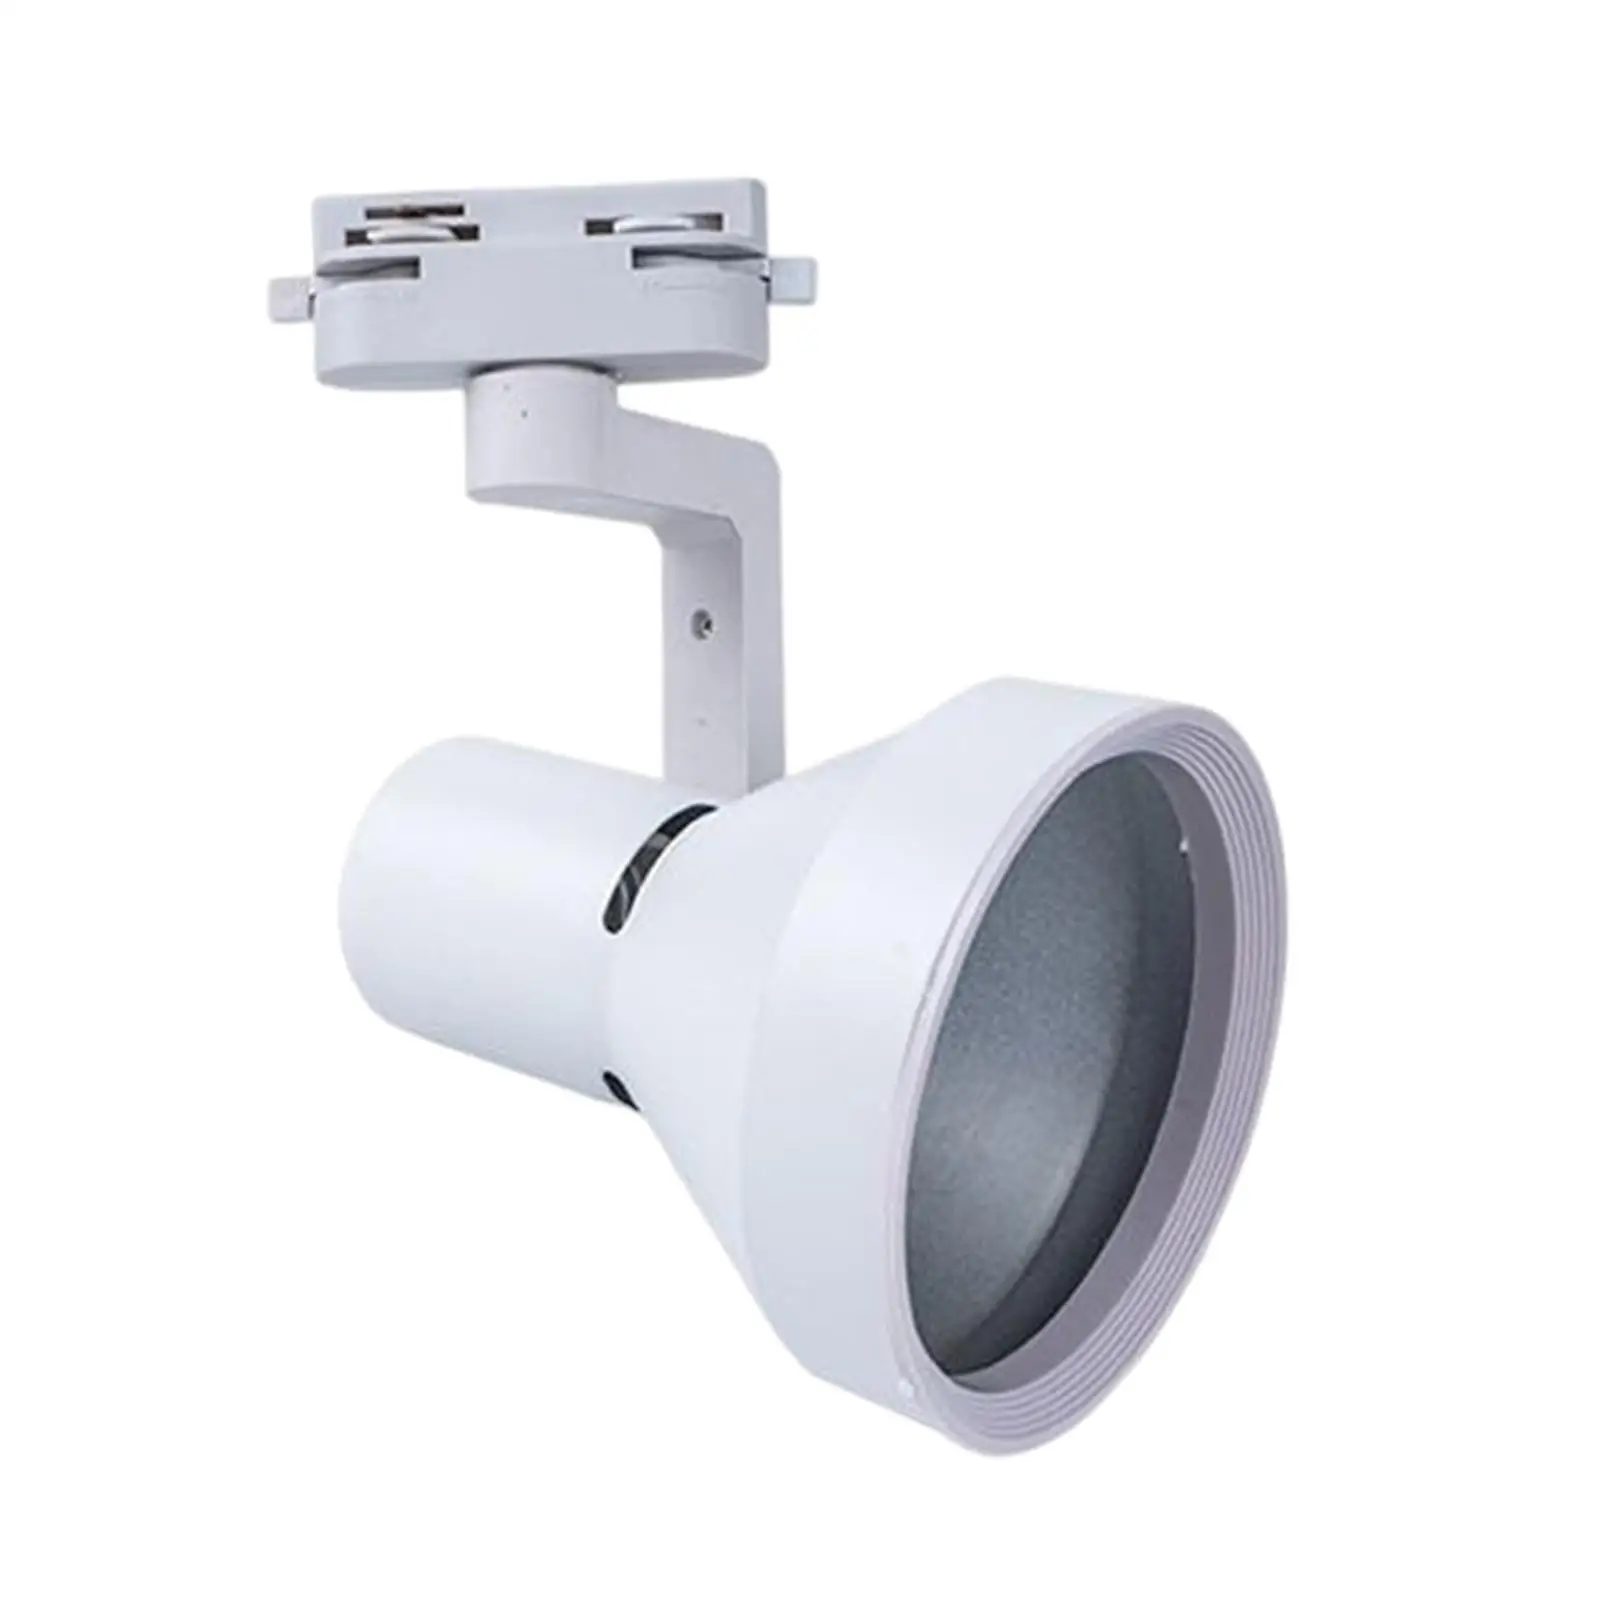 Par30 LED Track Light Shade Cover Bracket E27 Threaded White for Hotel Supermarket and Office Accessory Painted Surface Durable